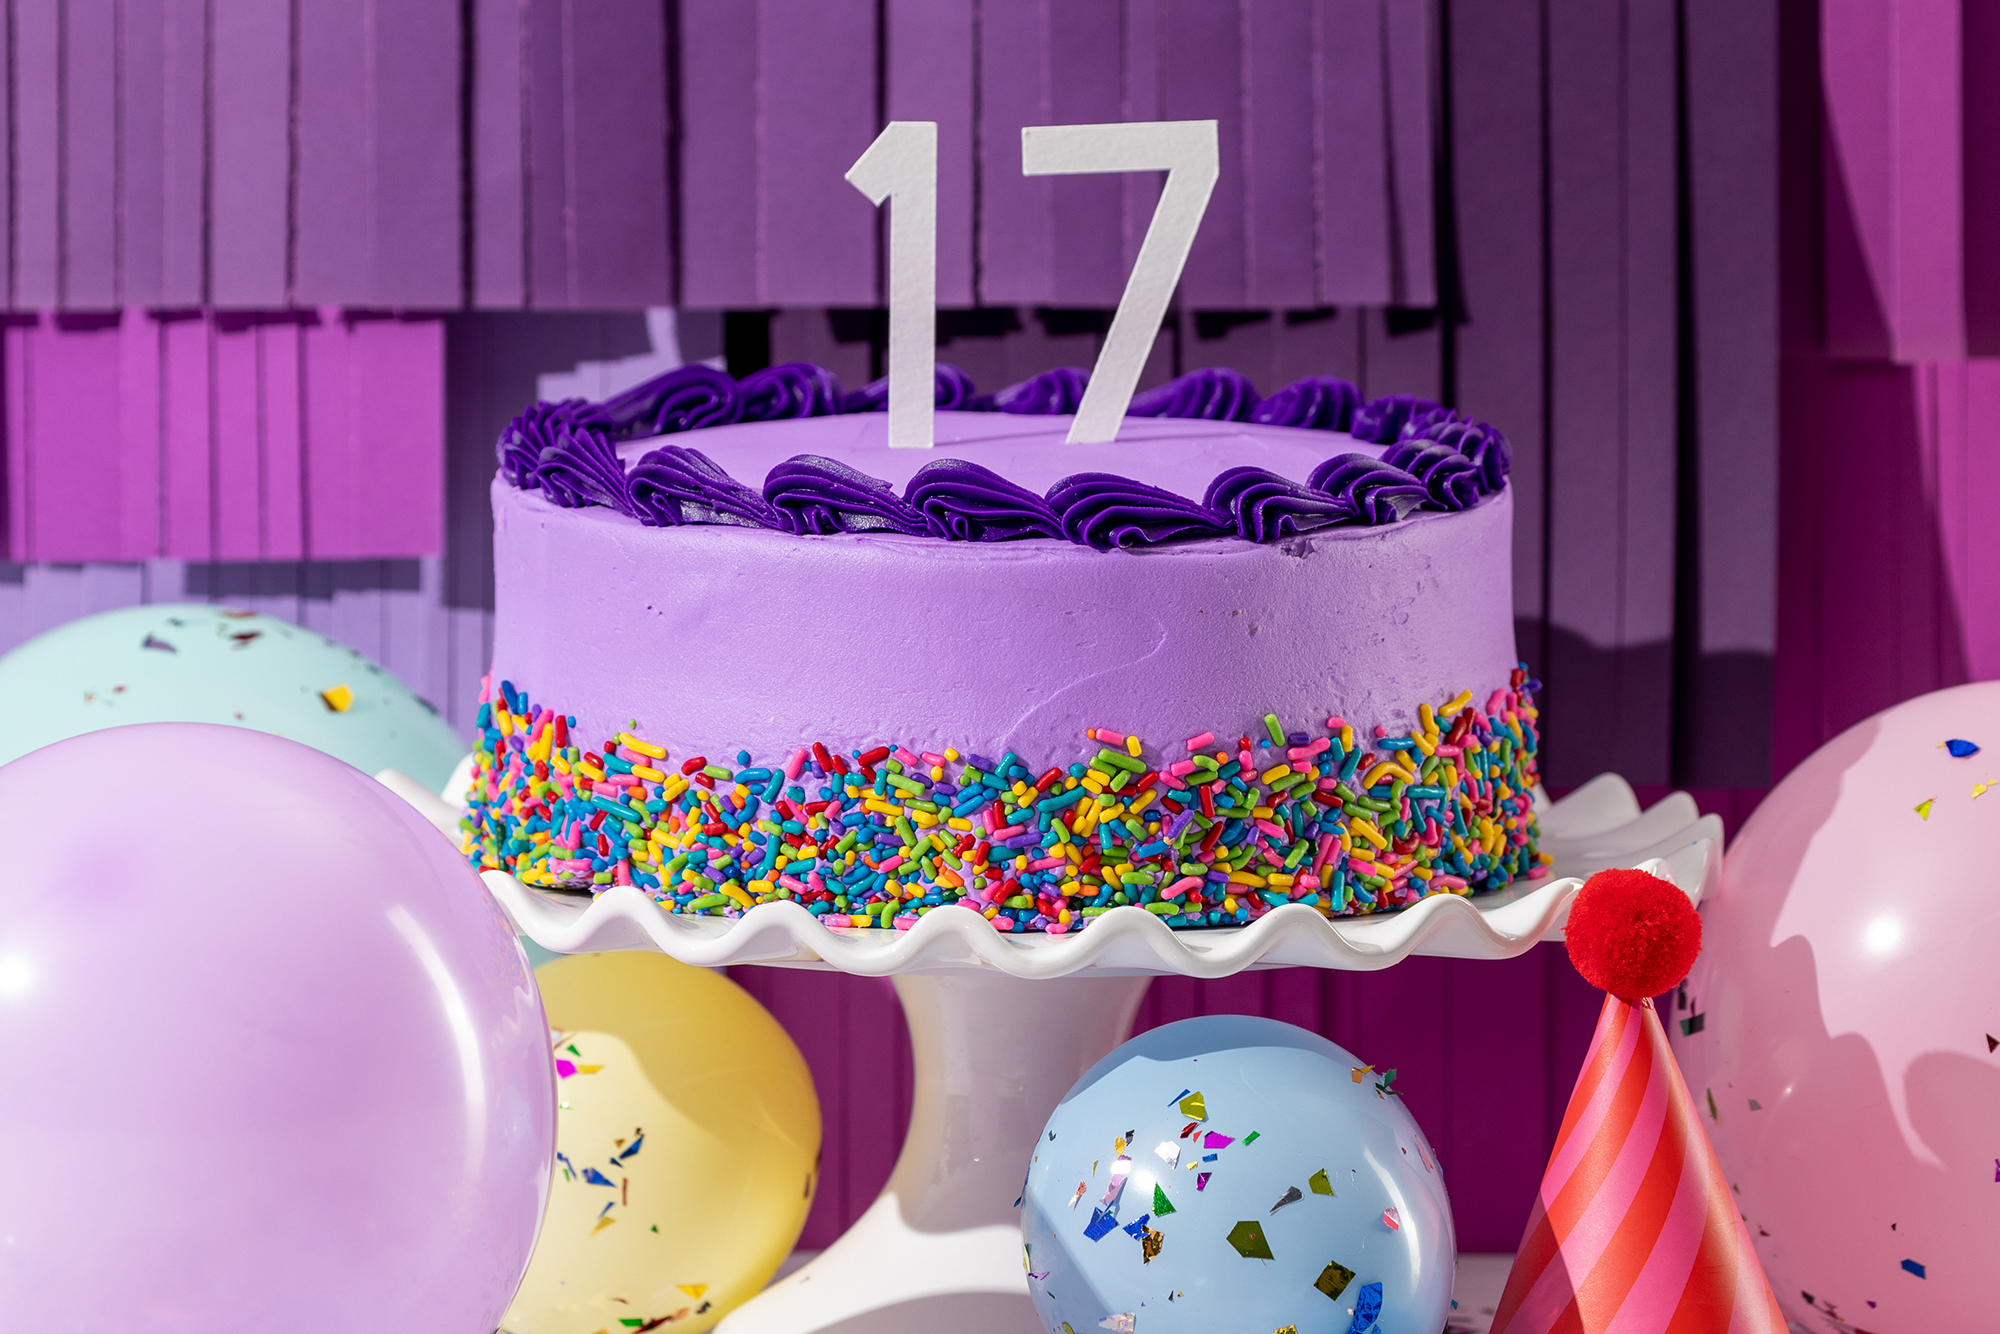 Scentsy's 17th birthday cake with balloons around